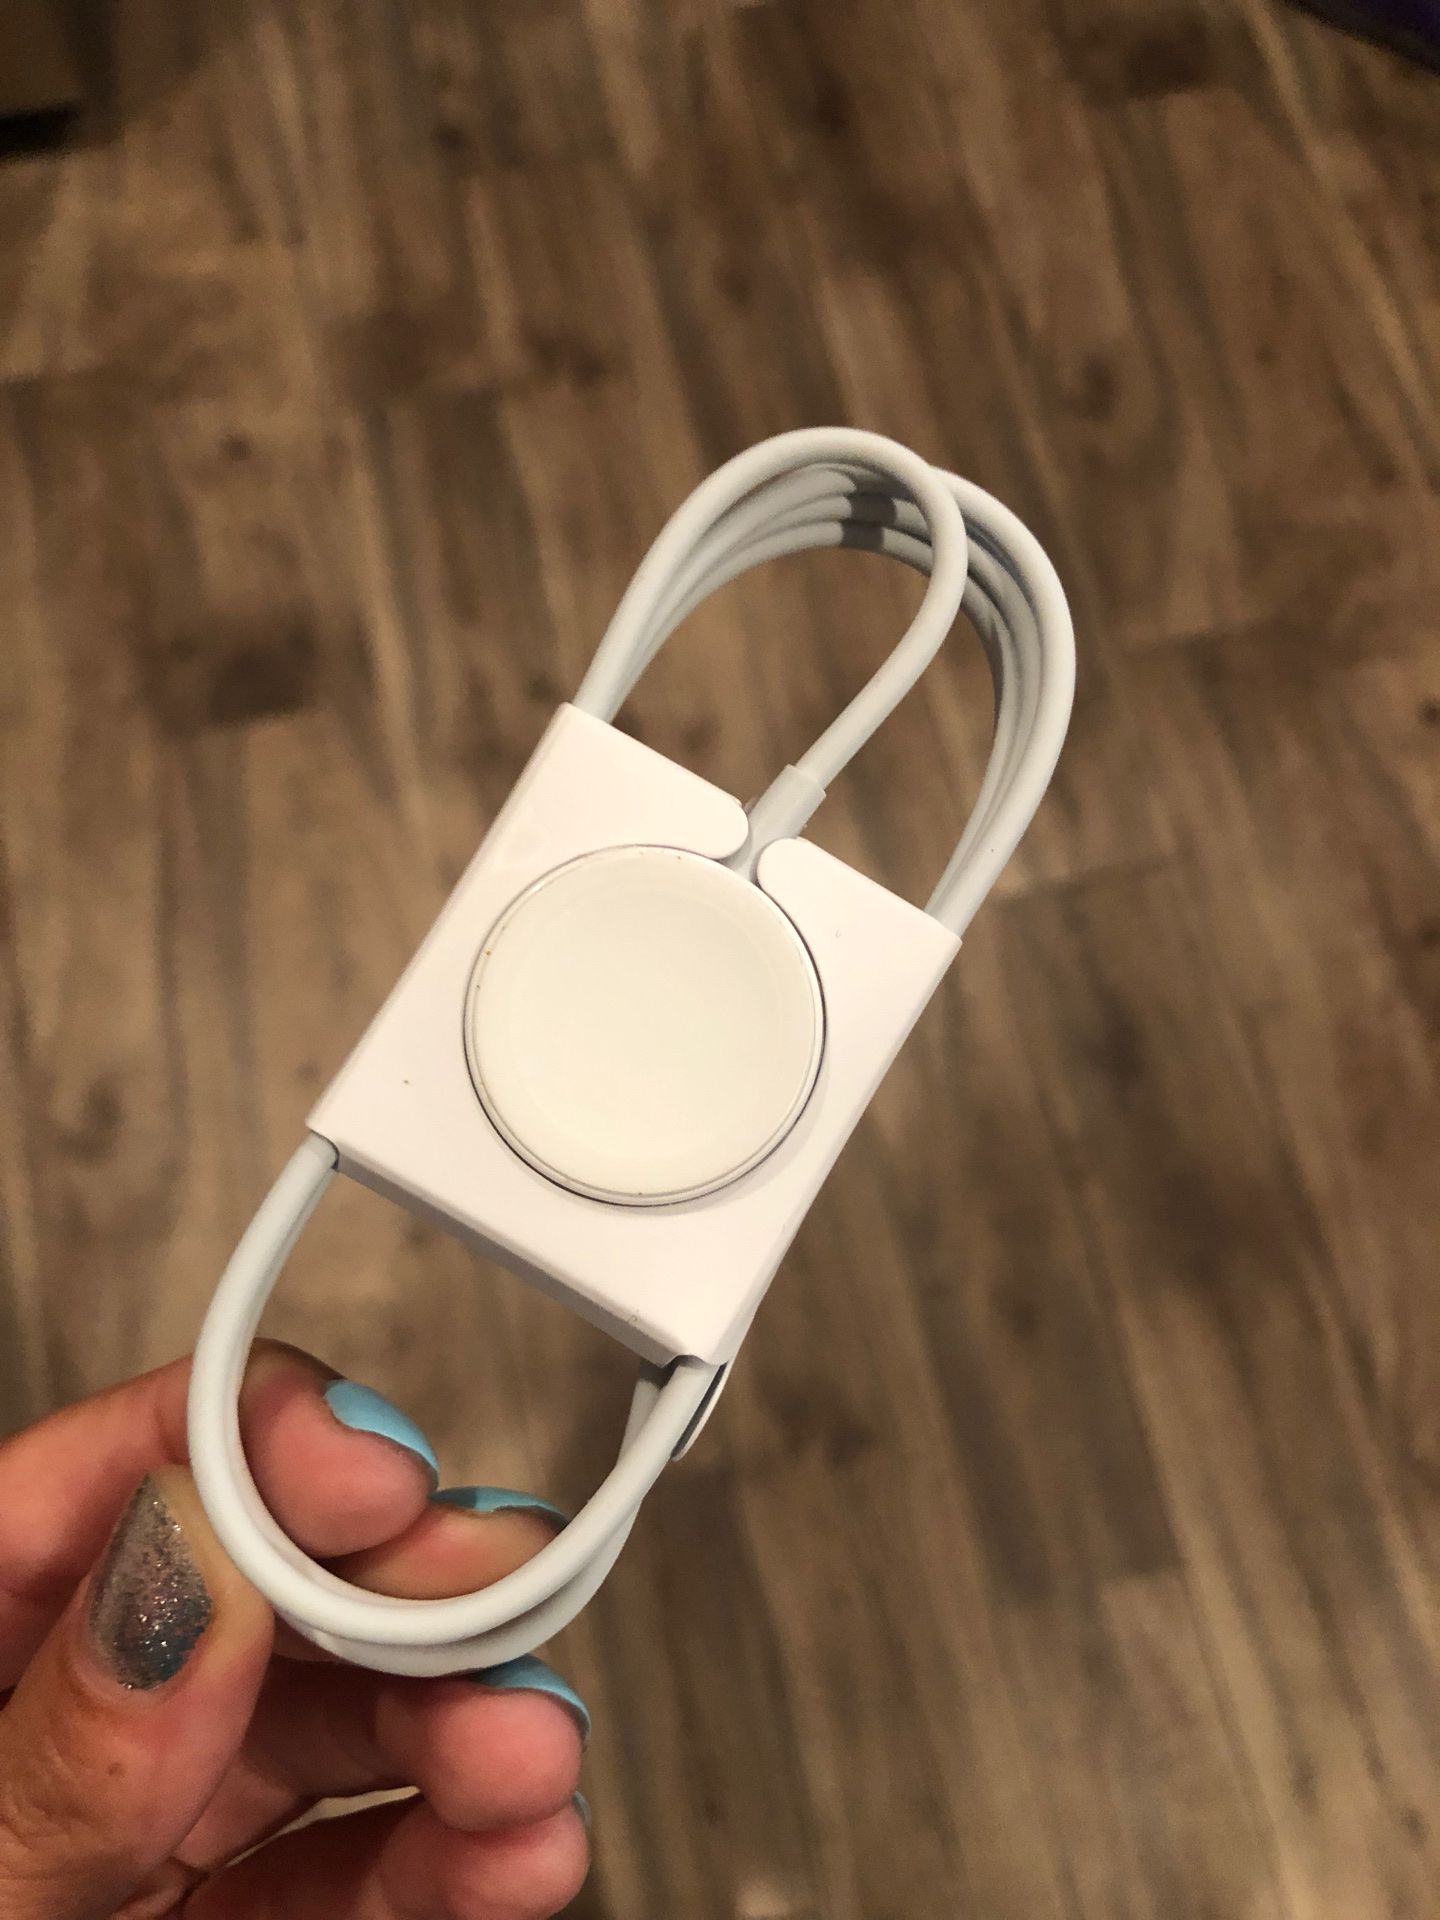 Brand new Apple Watch charger